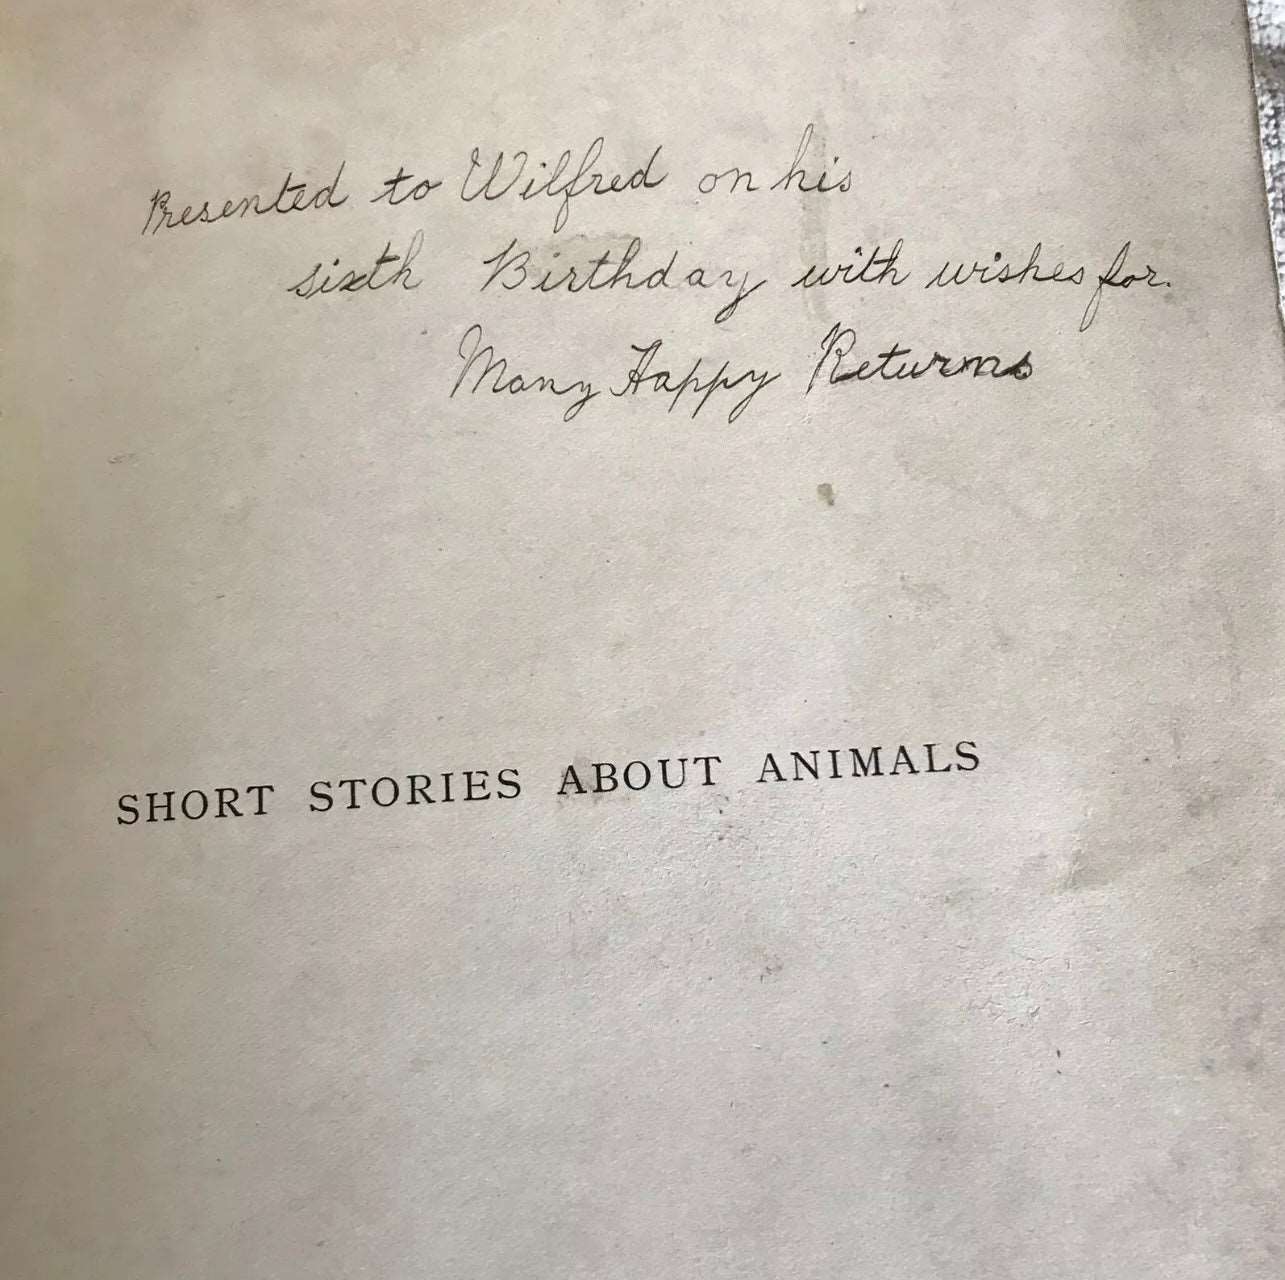 1903*1st* Uncle Charlies Short Stories About Animals - Gertrude Sellon(Harrison) Honeyburn Books (UK)